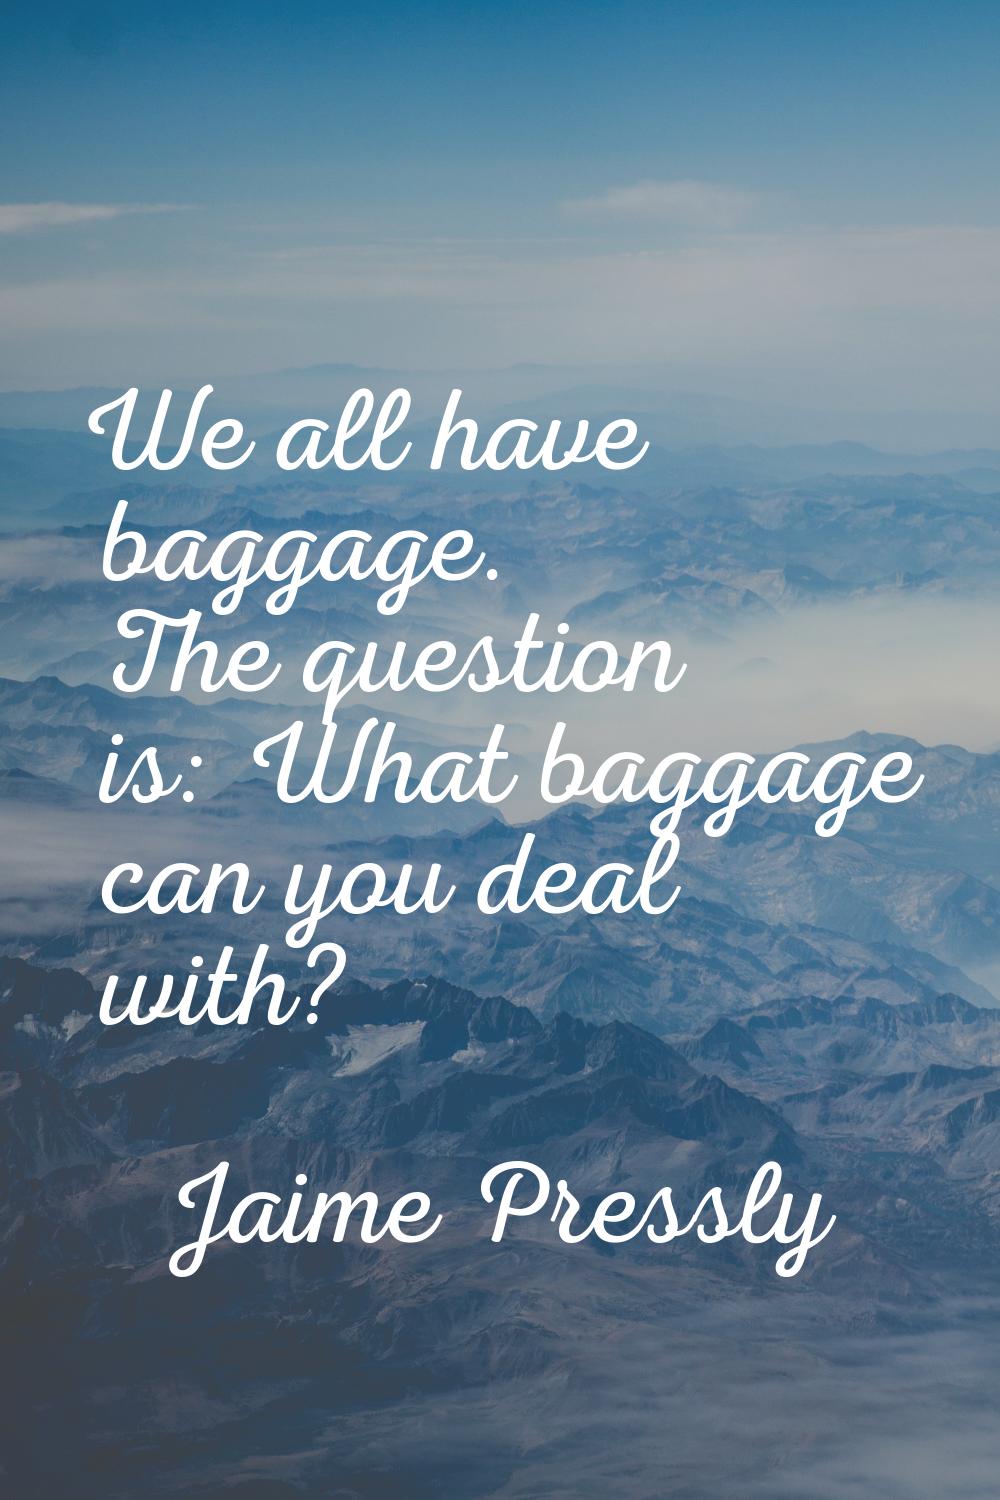 We all have baggage. The question is: What baggage can you deal with?